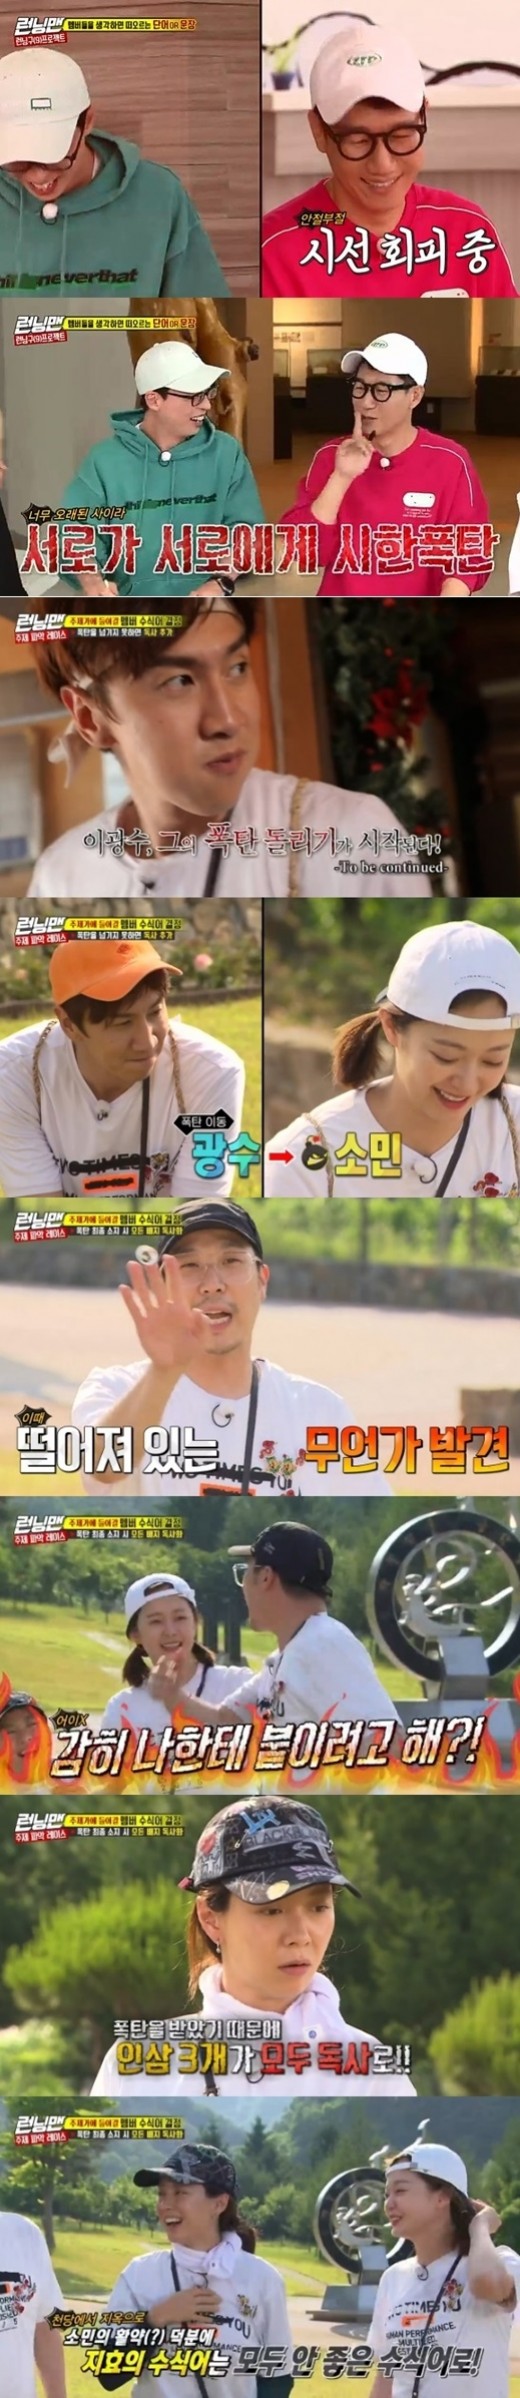 SBS Running Man kept the top spot in the same time zone of 2049 target audience rating.According to Nielsen Korea, the ratings agency, Running Man, which aired on the 16th, soared to 8.4% of the highest audience rating per minute, and the 2049 target audience rating, an important indicator of major advertising officials, recorded 3.8% (based on the second part of the audience rating of households in the Seoul Capital Area), ranking first in the same time zone, surpassing Masked Wang and Donkey Ears.The average audience rating was 5.2% in the first part and 6.8% in the second part (based on the audience rating of households in the Seoul Capital Area).The broadcast was decorated with a theme-reading race for the theme song to be presented at the Fan Meeting this summer.The members had to set the number of good modifiers ( Ginseng badges) and bad modifiers (poison badges) of the theme song while they decided to participate in the songwriting of the theme song themselves, and had to move to the bomb within an hour of the bomb because there was a bomb.Because there is a time limit for bombs, if you pass that time, you will get a viper badge. Even if you take it, you will get another viper badge.Among them, Jeon So-min showed off the like a poison that led to the reversal, shook the plate of the race, and noticed that he had a bomb late on the last mission.The scene soared to 8.4% of the audience rating per minute, accounting for the best one minute.So, Jeon So-min showed boldness of handing over his bomb to Song Ji-ryu, and Song Ji-hyo, who ran Race 1st pRace, had to watch his ginseng badge turned into a poison badge at the last minute.Yoo Jae-Suk took the first pRace in the race with Fisherman Jiri, and Yoo Jae-Suk chose a modifier to enter the theme song based on the badge of each member.The Running Man Theme Song, in which members participated in the songwriting, will be unveiled at the Running Man Fan Meeting to be held this summer.